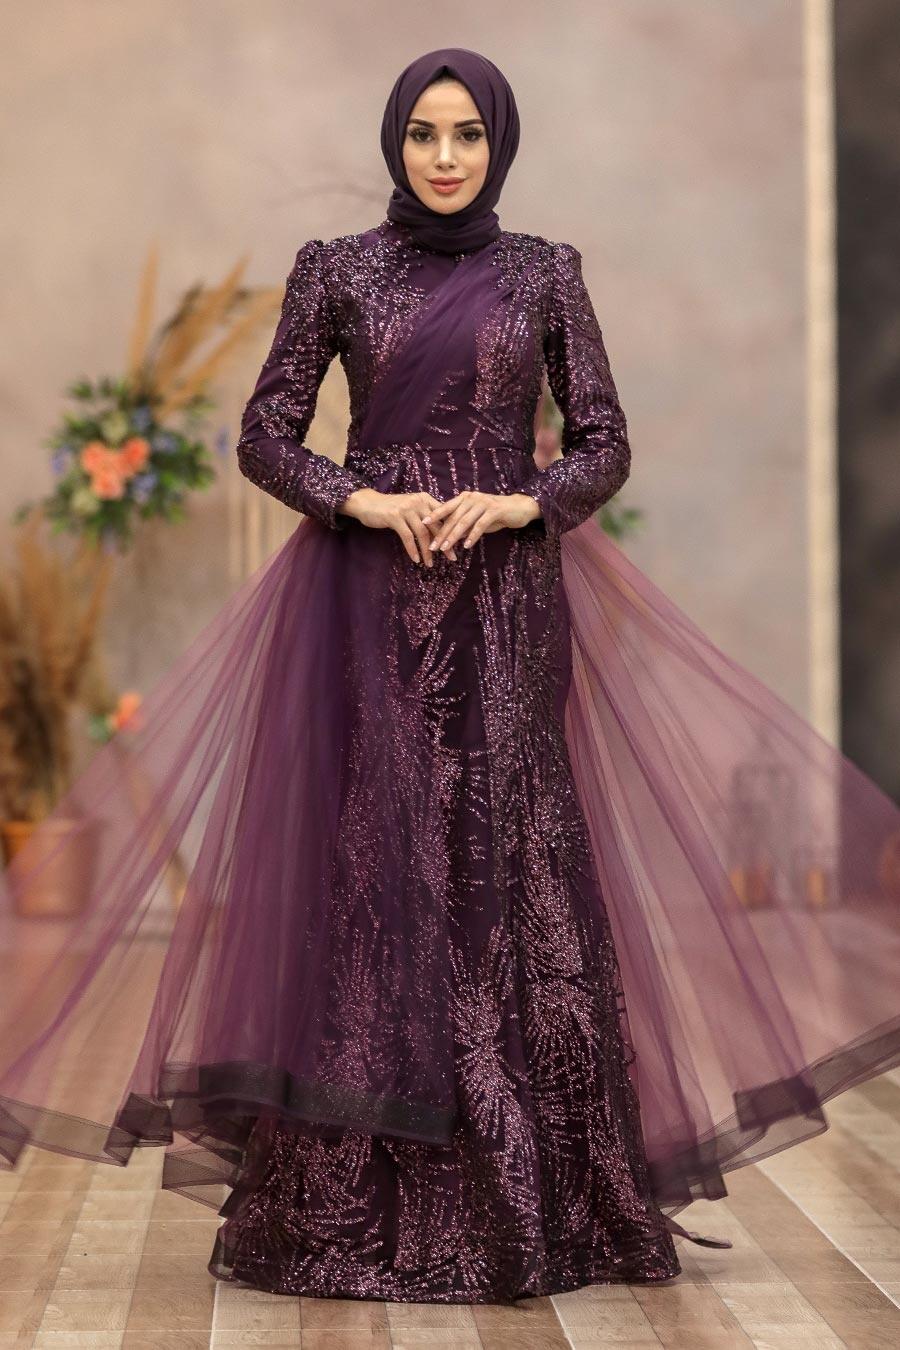 Ethereal beautiful bride in a purple gown, white vei...